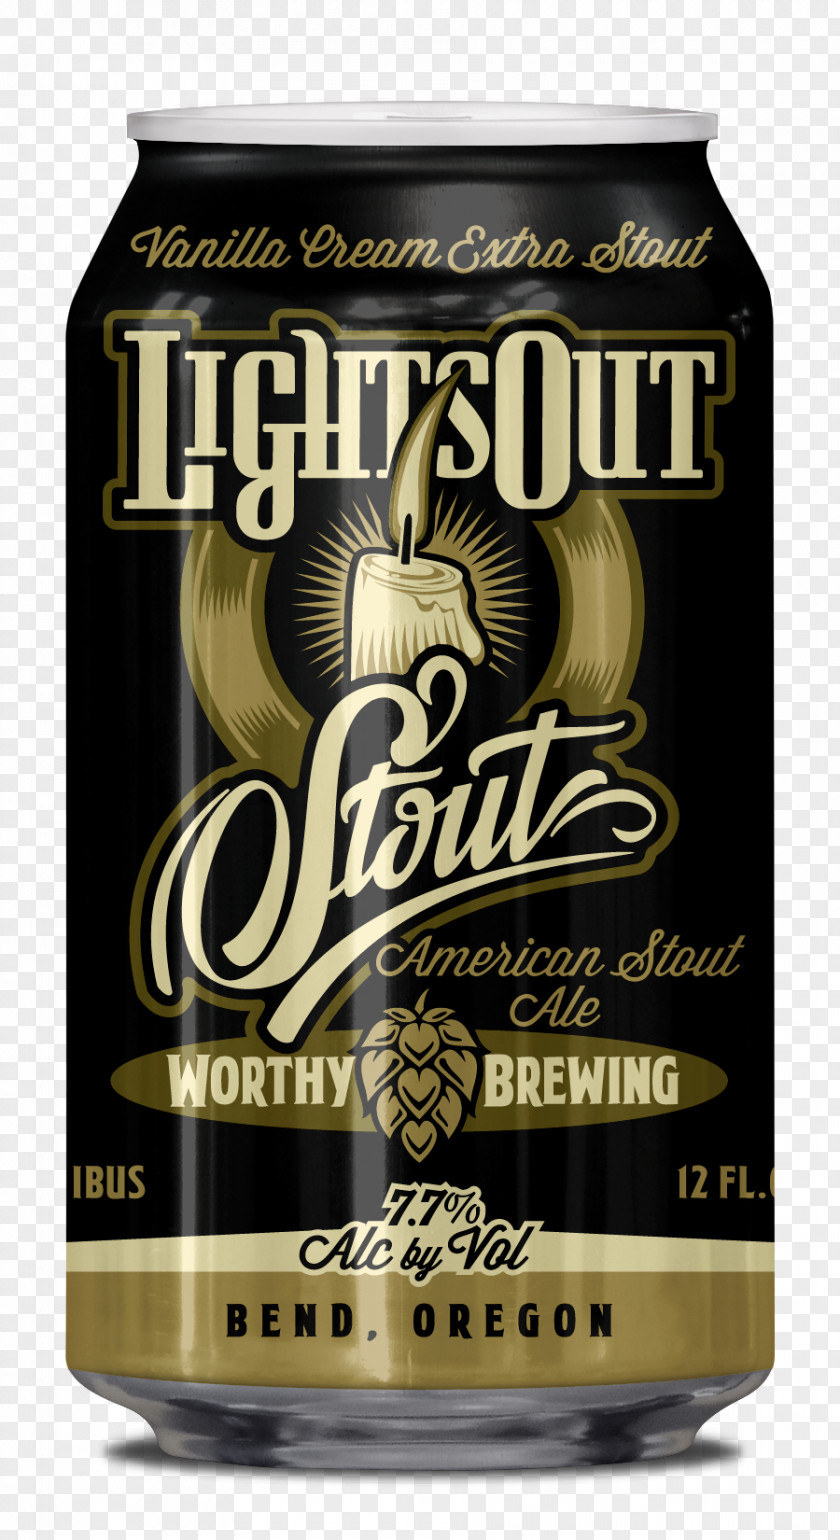 Lights Out Beer Worthy Brewing Company Brewery Tin Can PNG